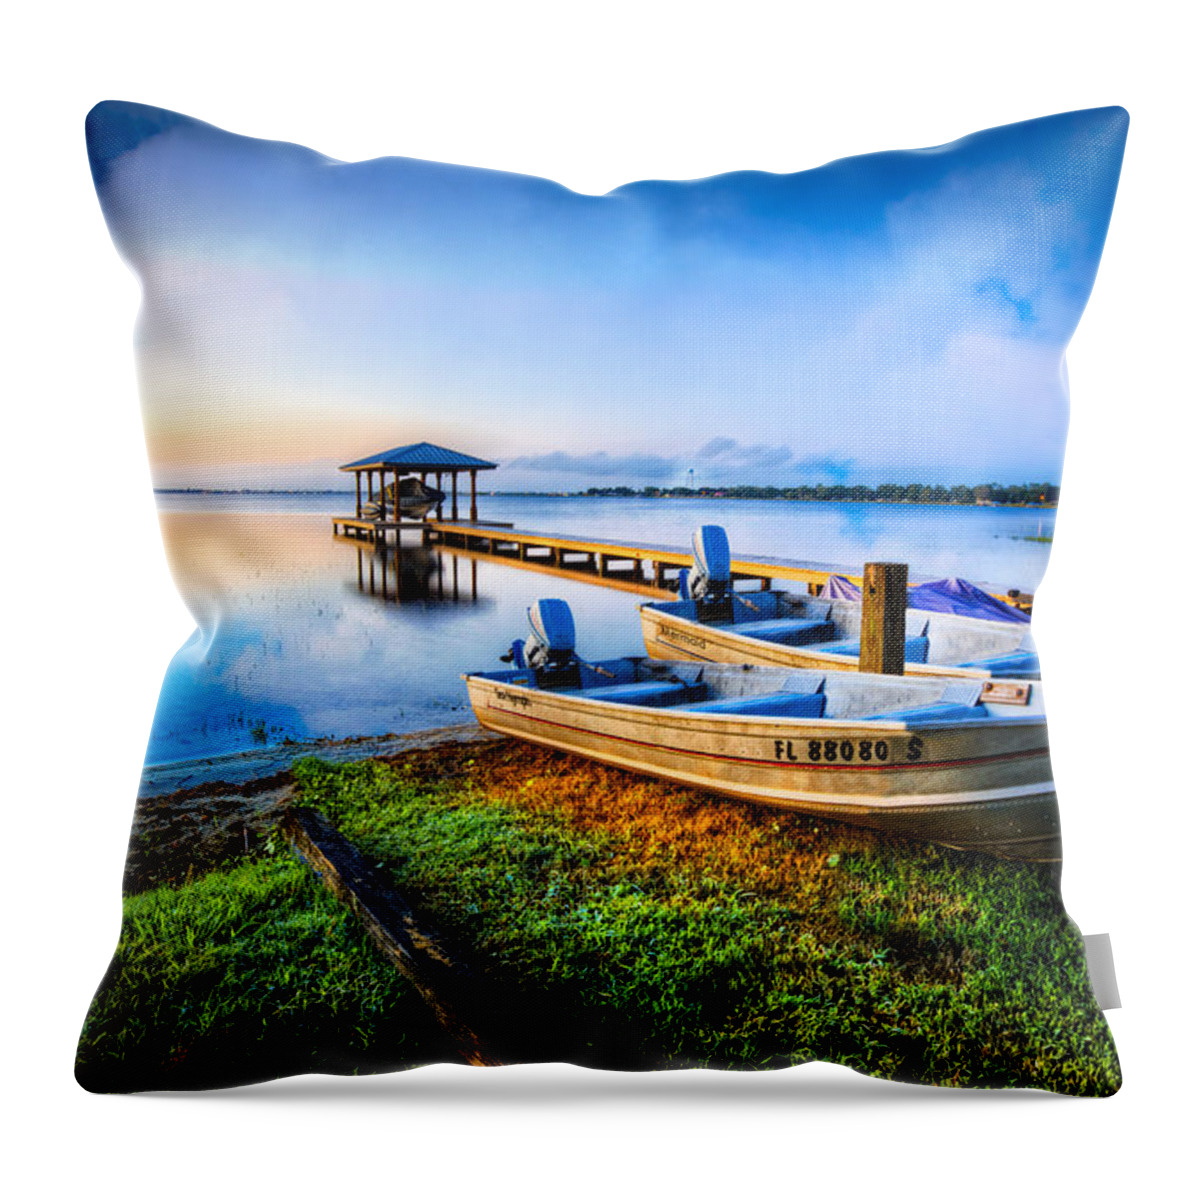 Boats Throw Pillow featuring the photograph Boats At The Lake by Debra and Dave Vanderlaan